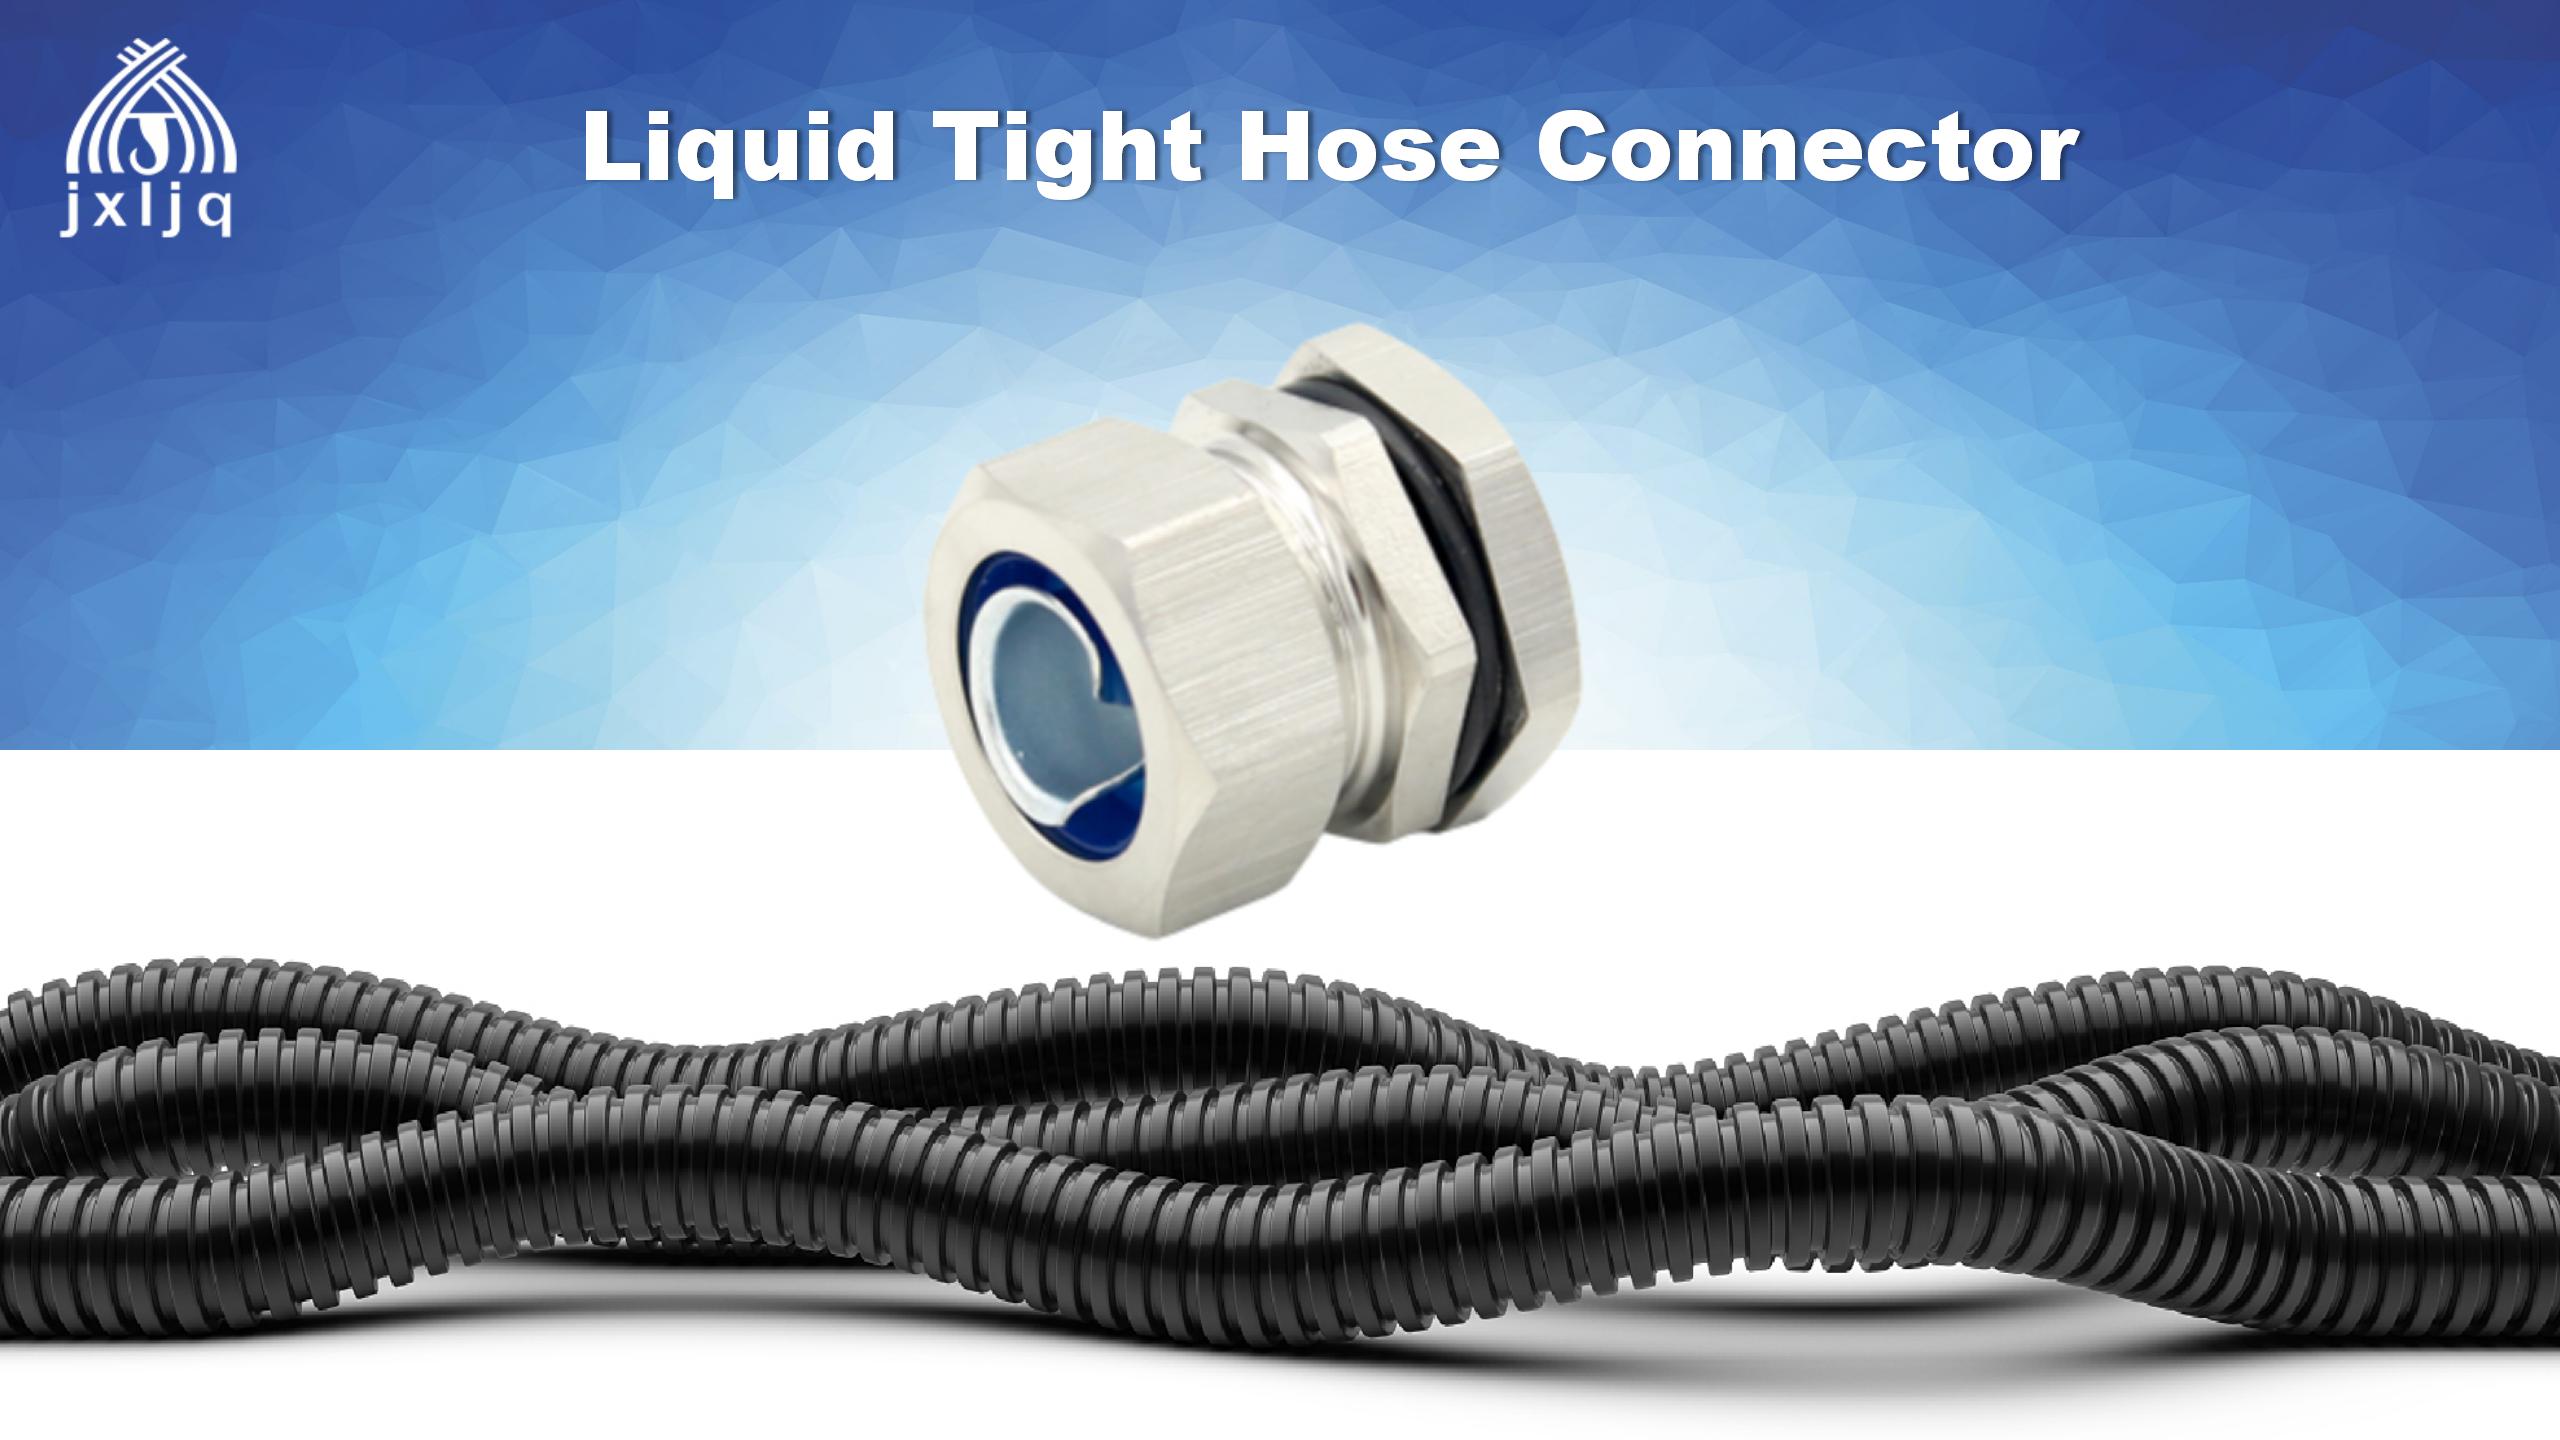 The functions of Liquid Tight Hose Connector